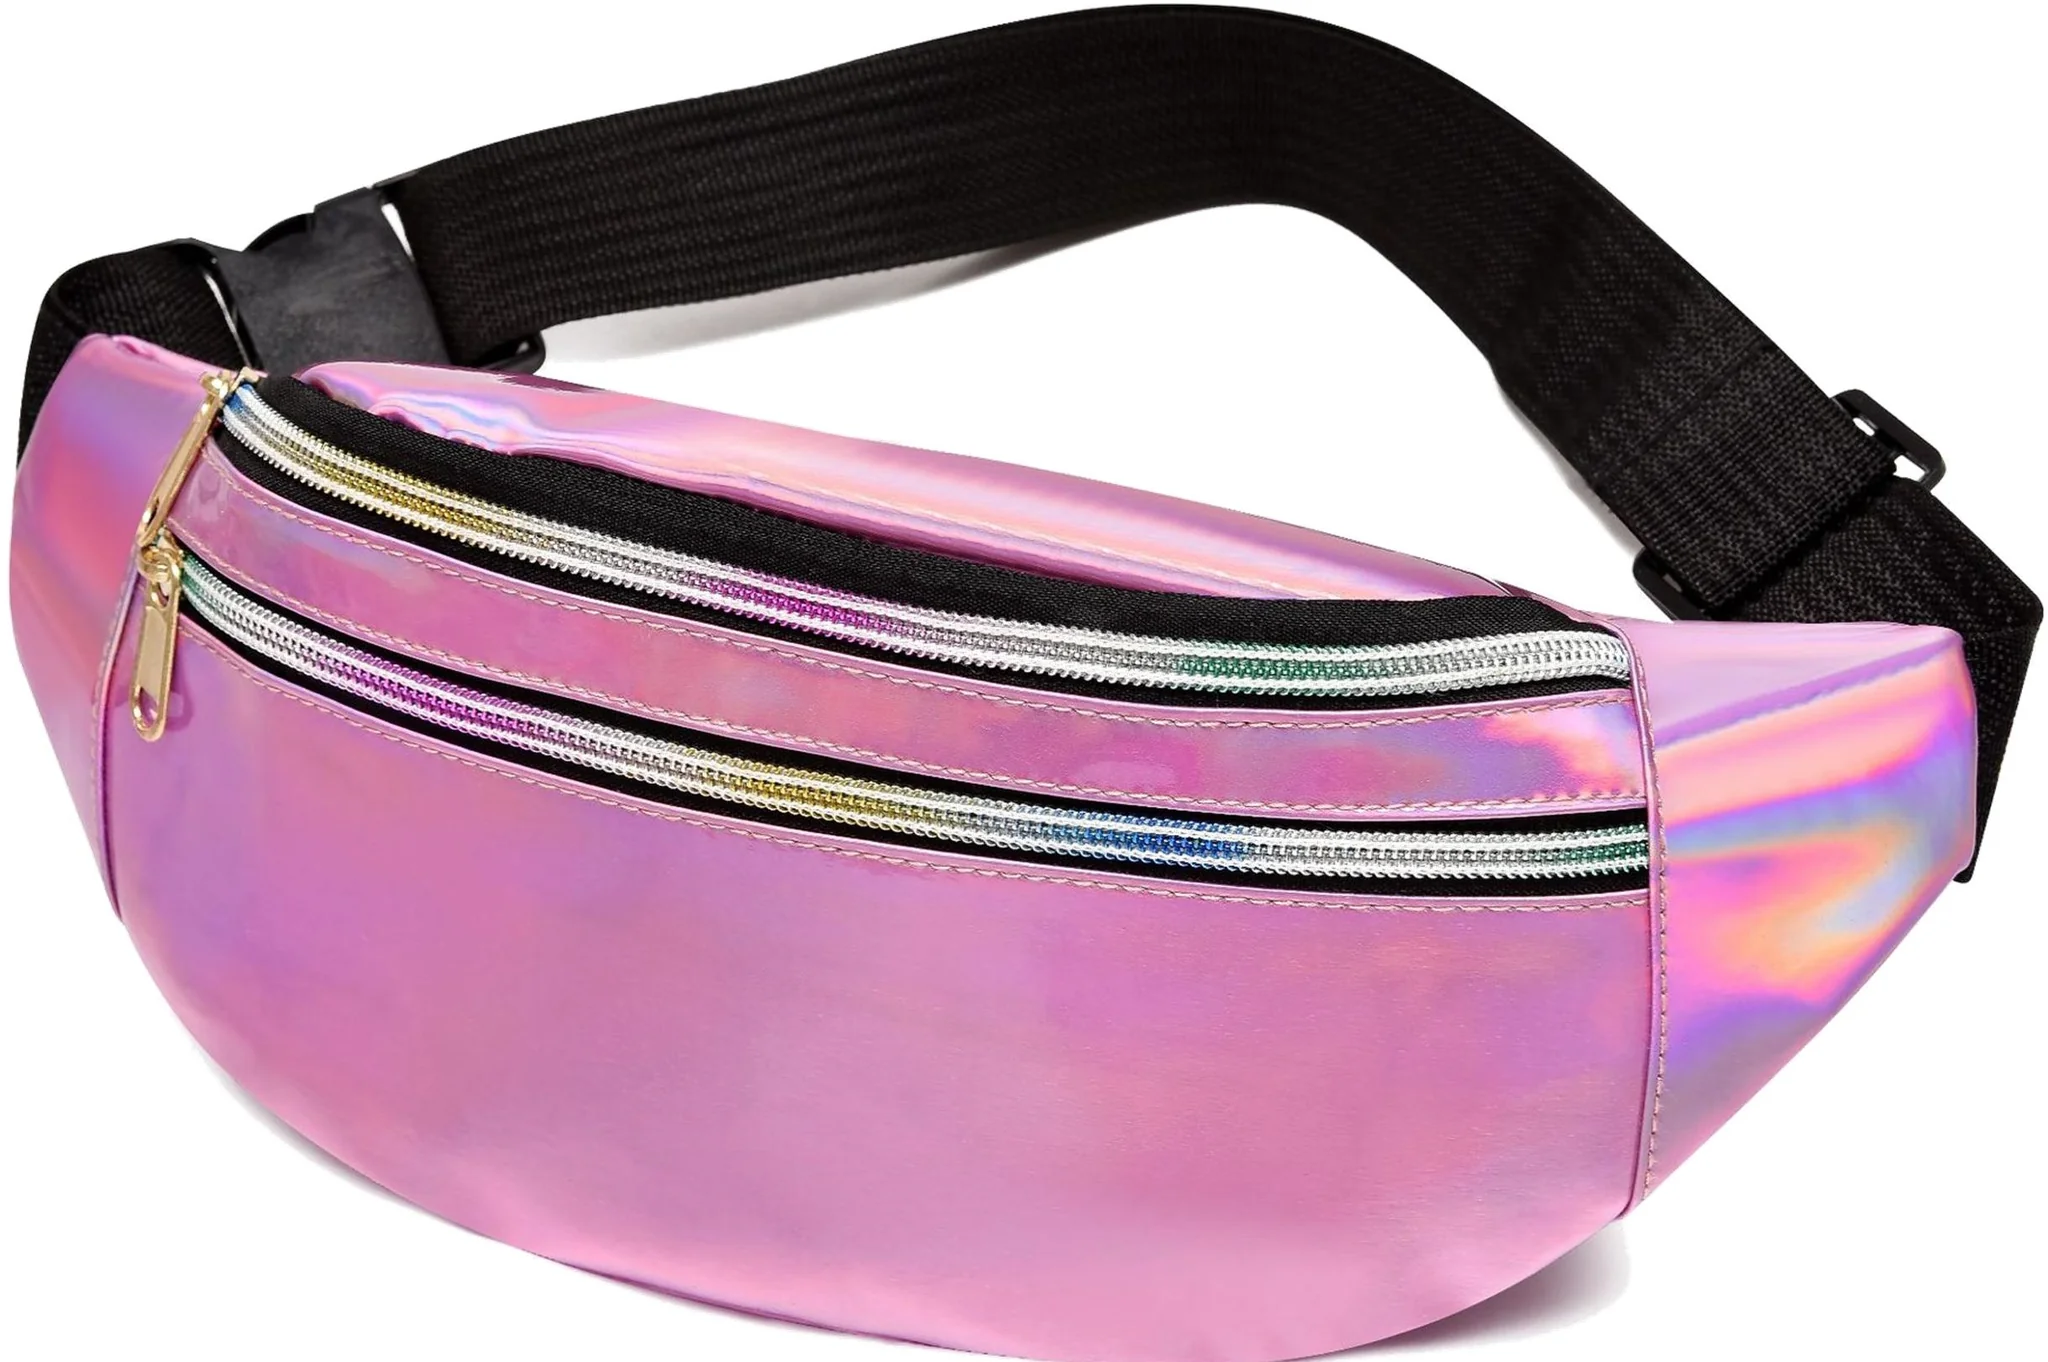 Knobs Metallic Crystal Fanny Pack - Hot Pink